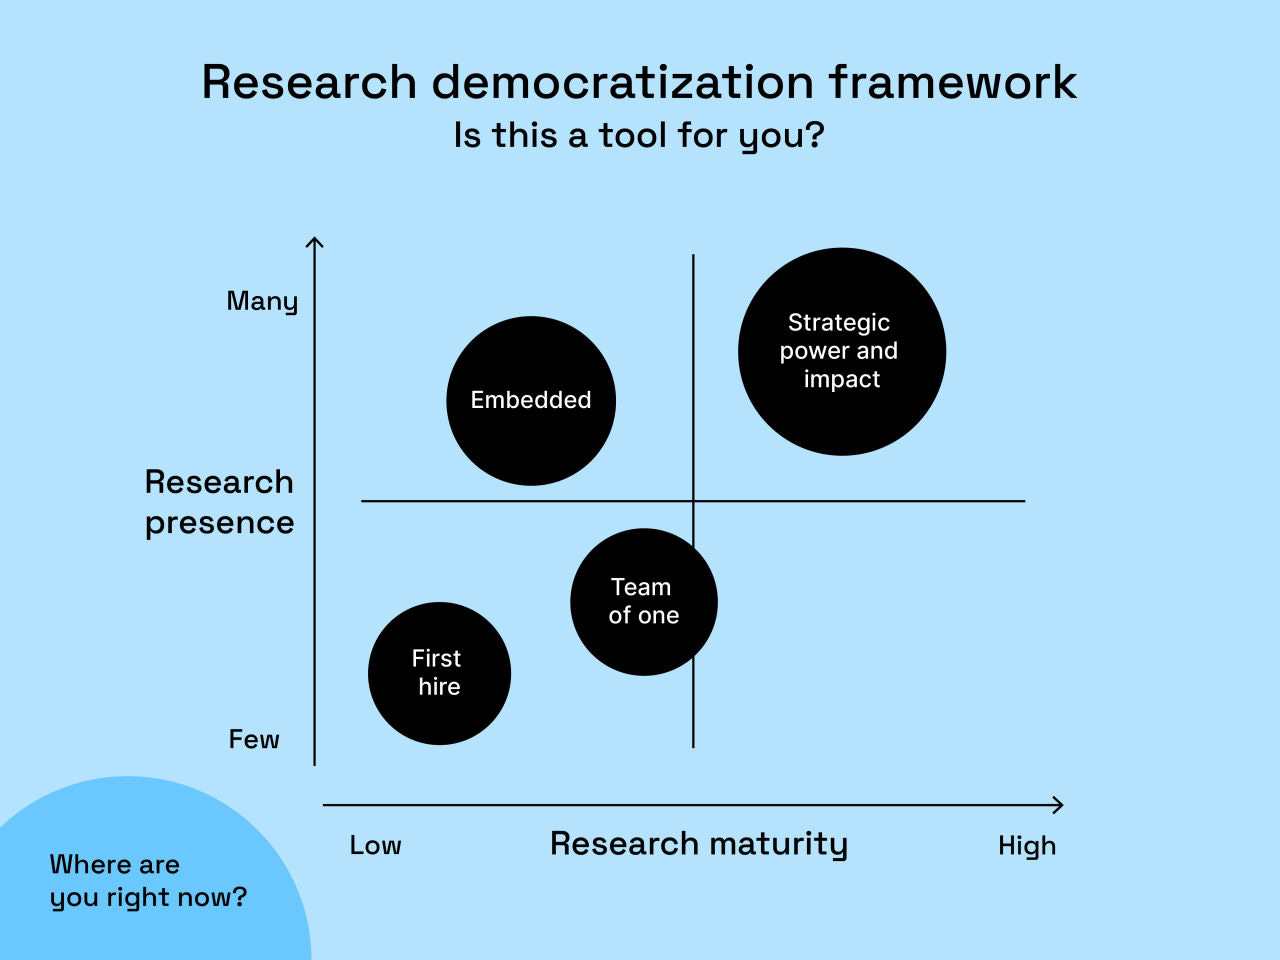 Democratization impacts a business in different ways, depending on where your org is at. 